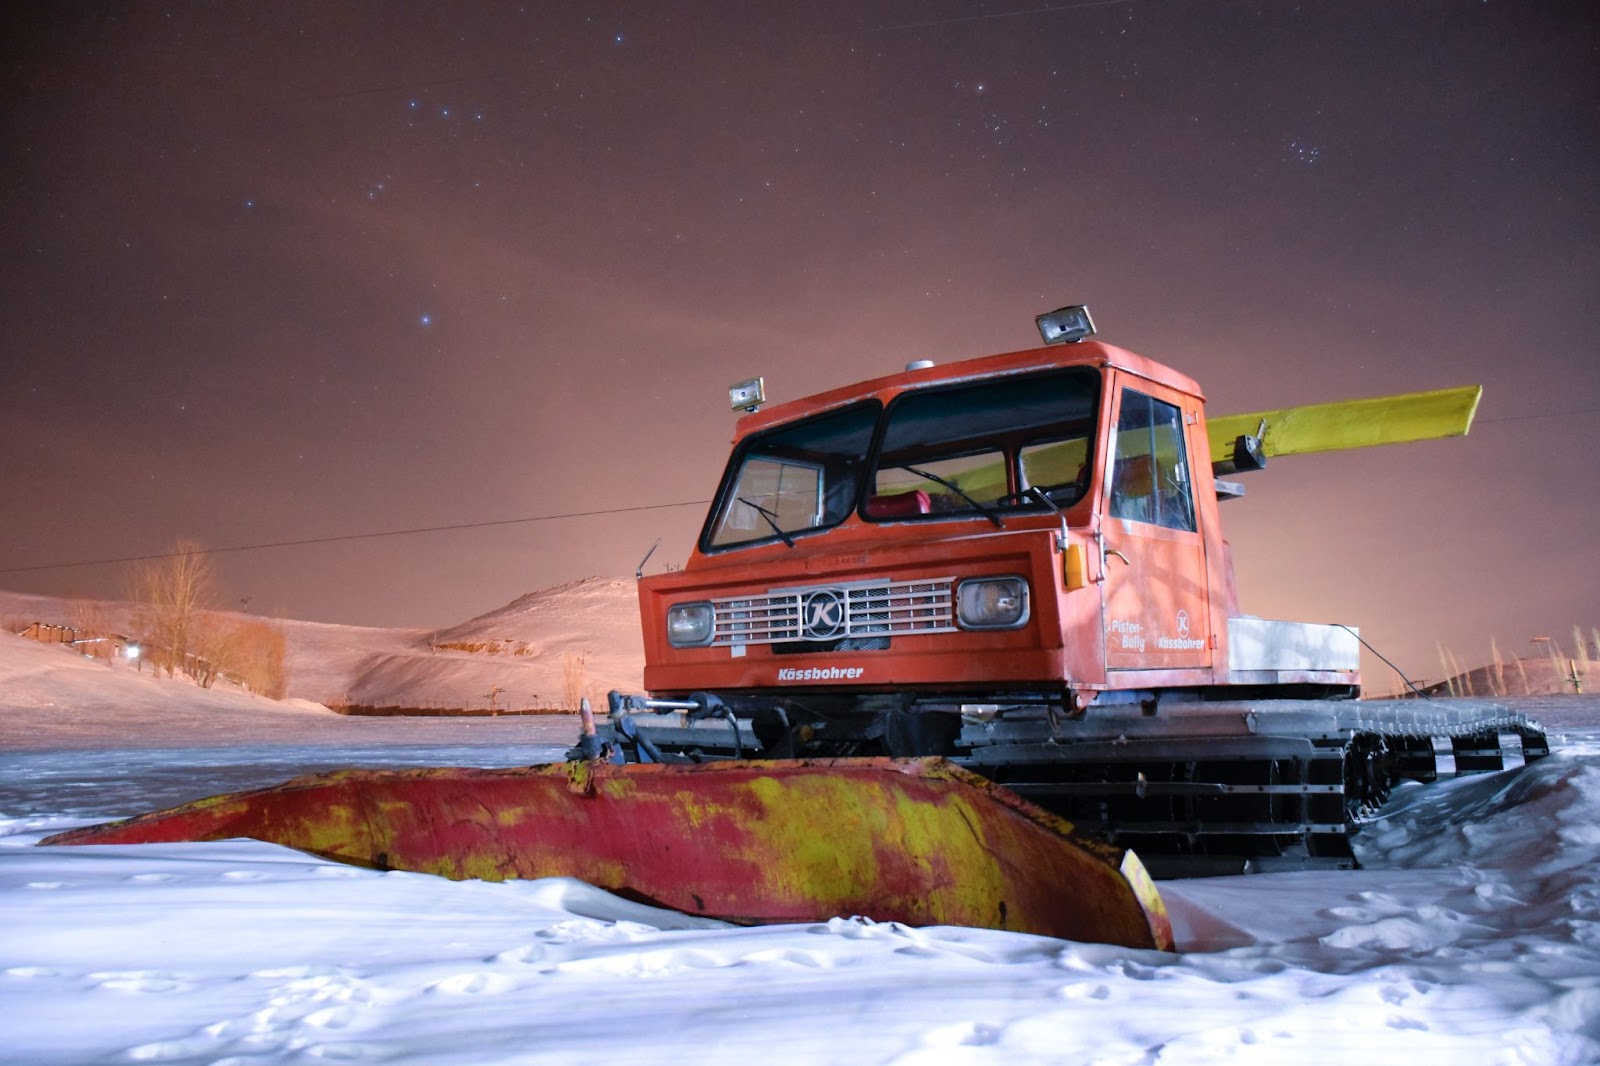 A snow plow in the middle of a snowy field at night